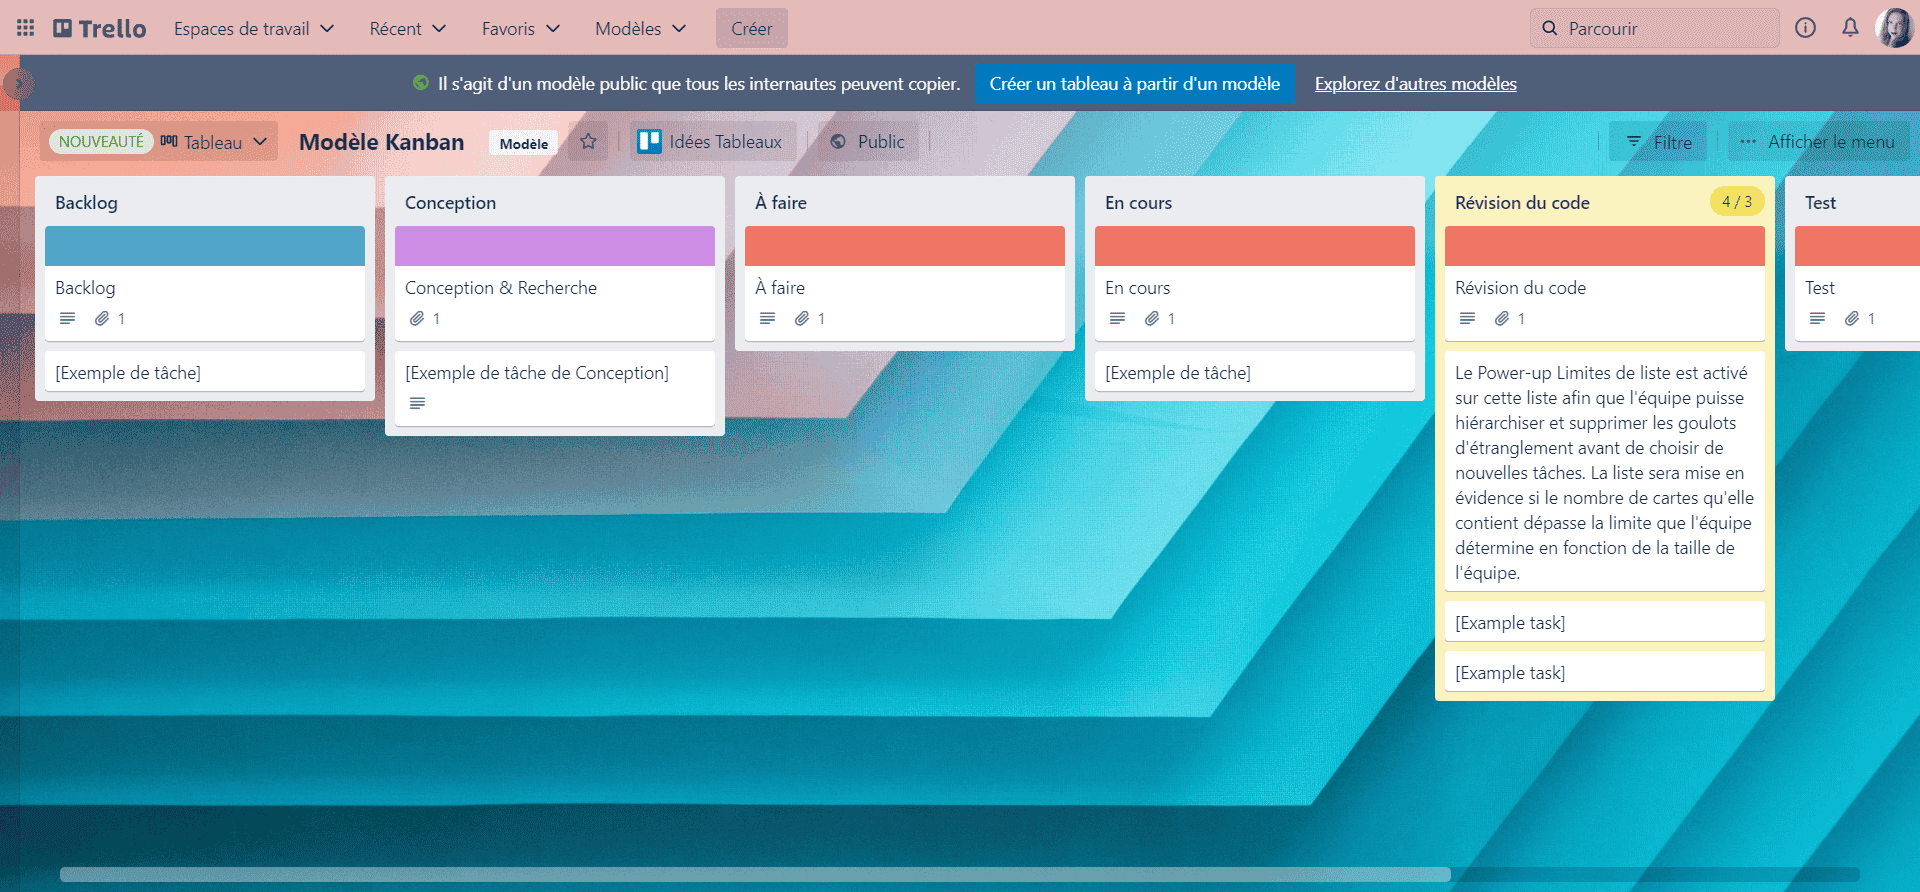 trello-interface outil gestion projet